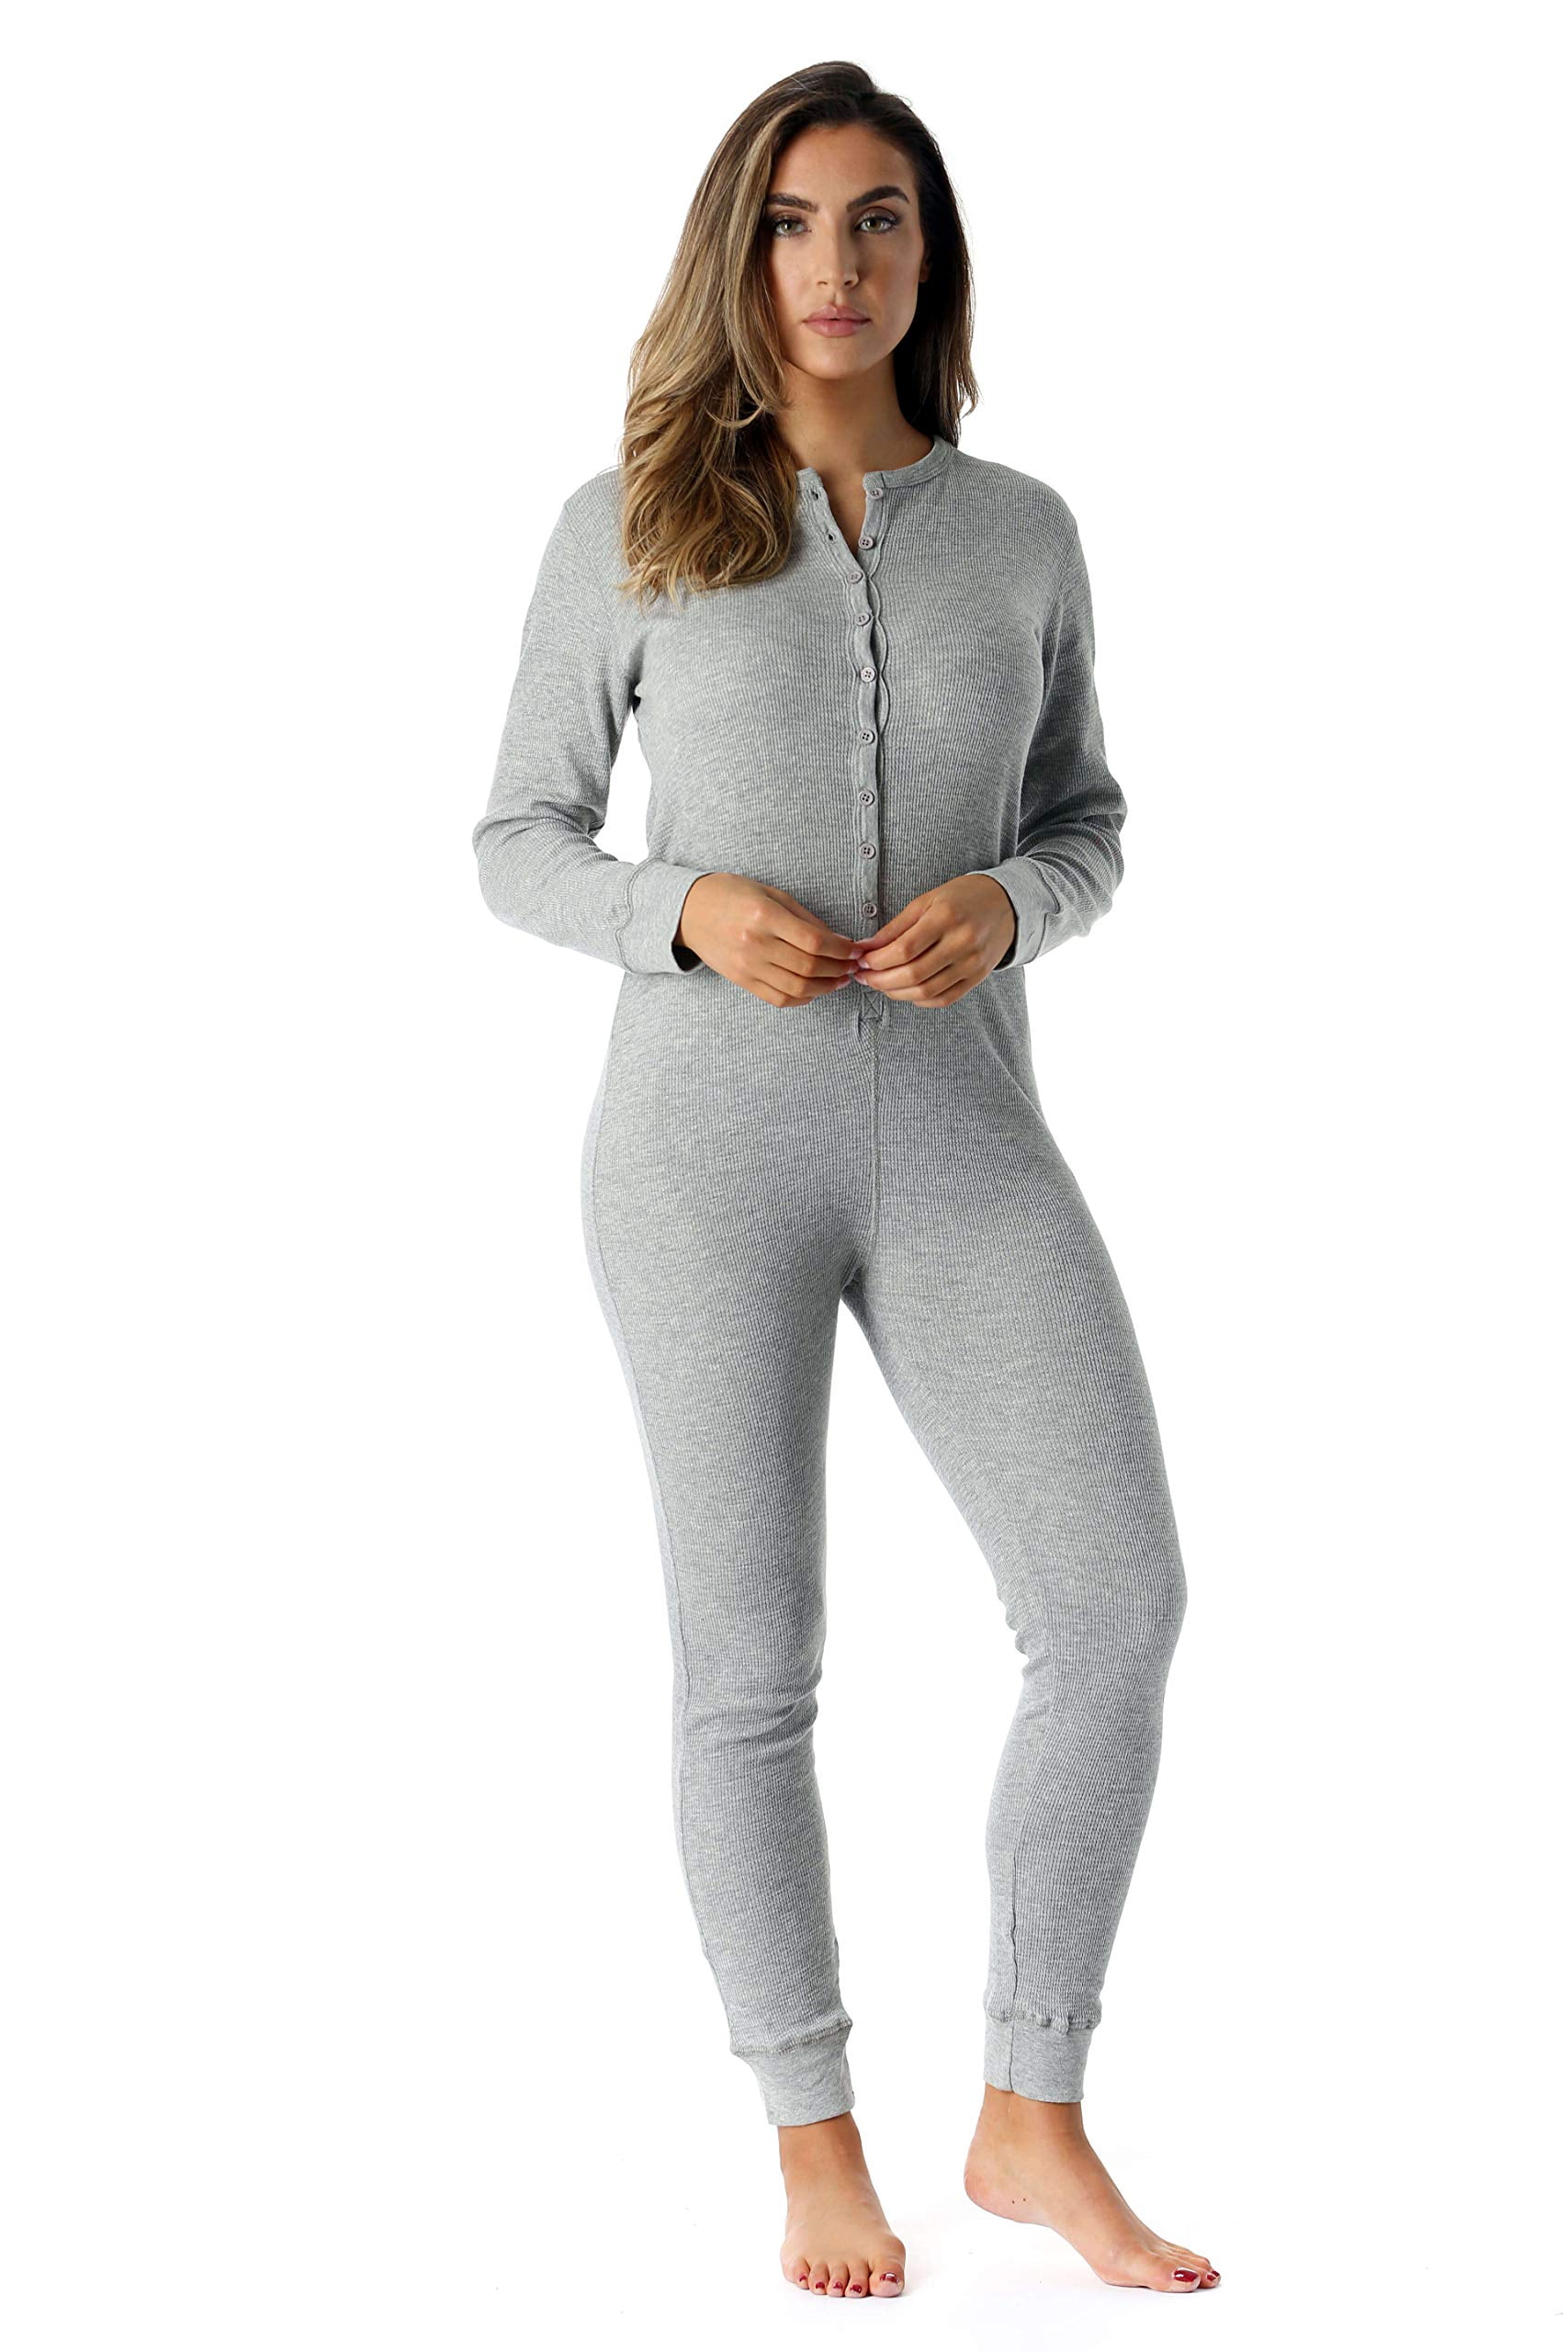 #followme Women's Thermal Henley Onesie - Soft and Cozy Union Suit for ...